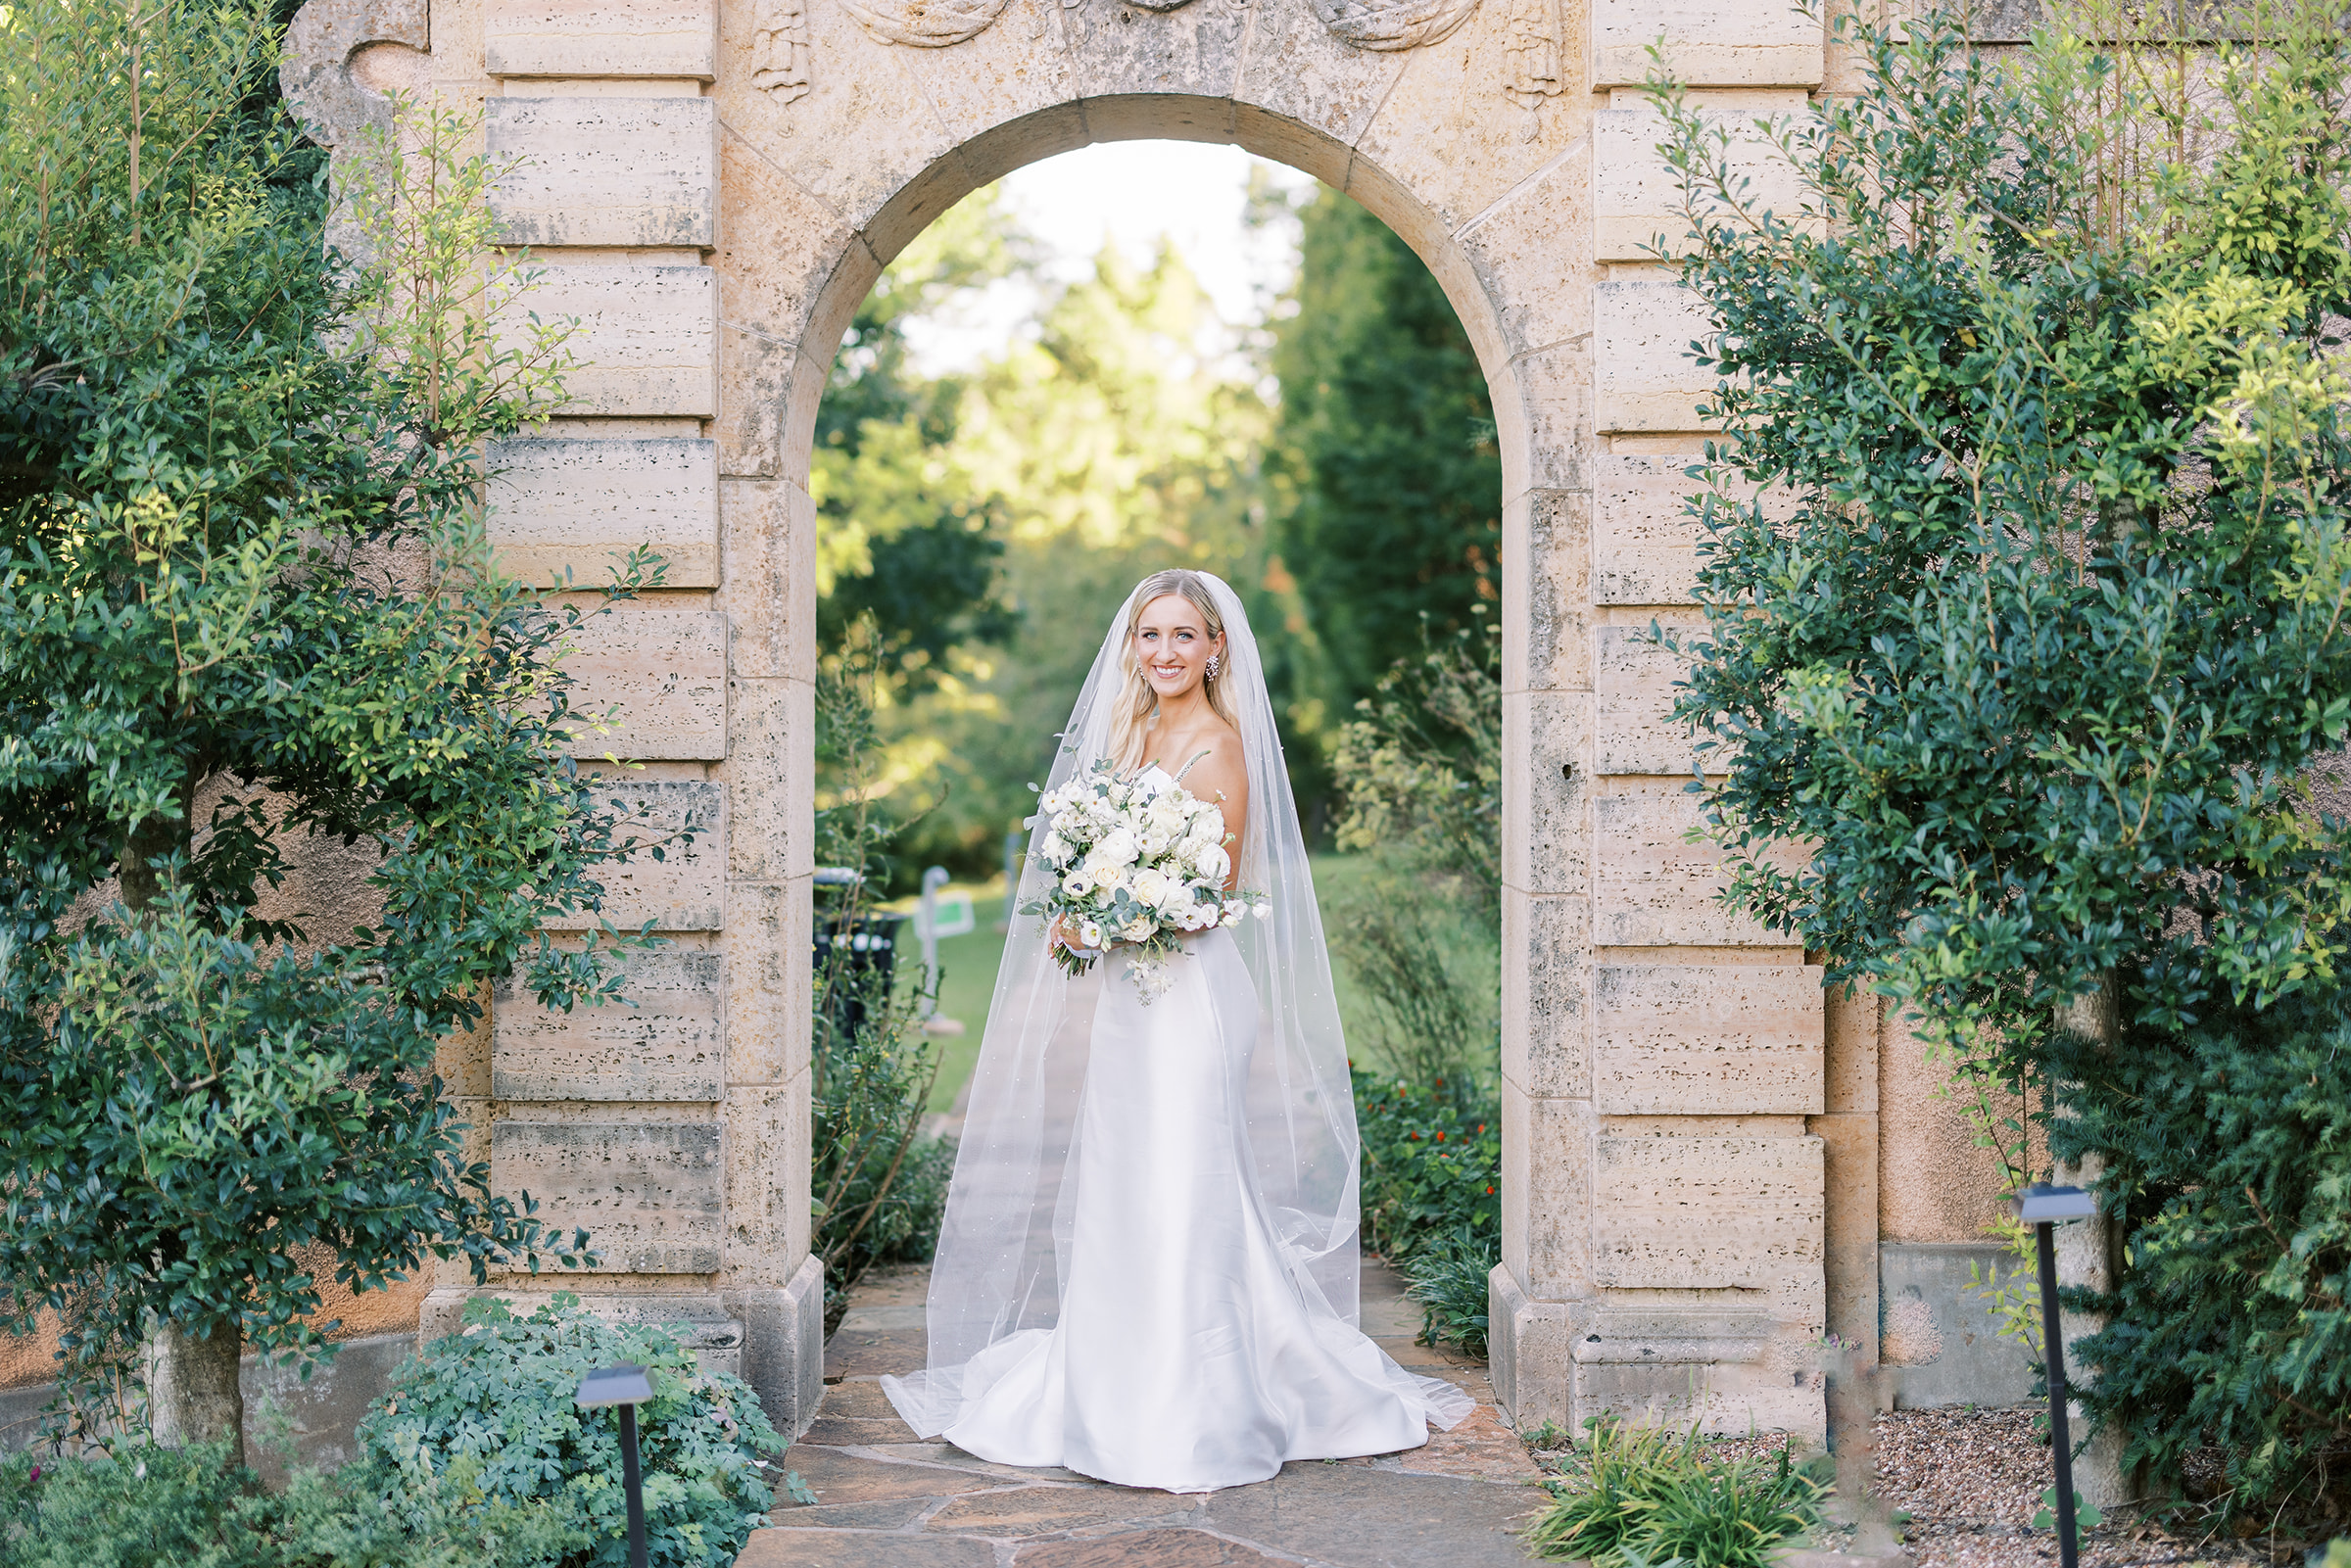 A bride in the gardens at Philbrook museum